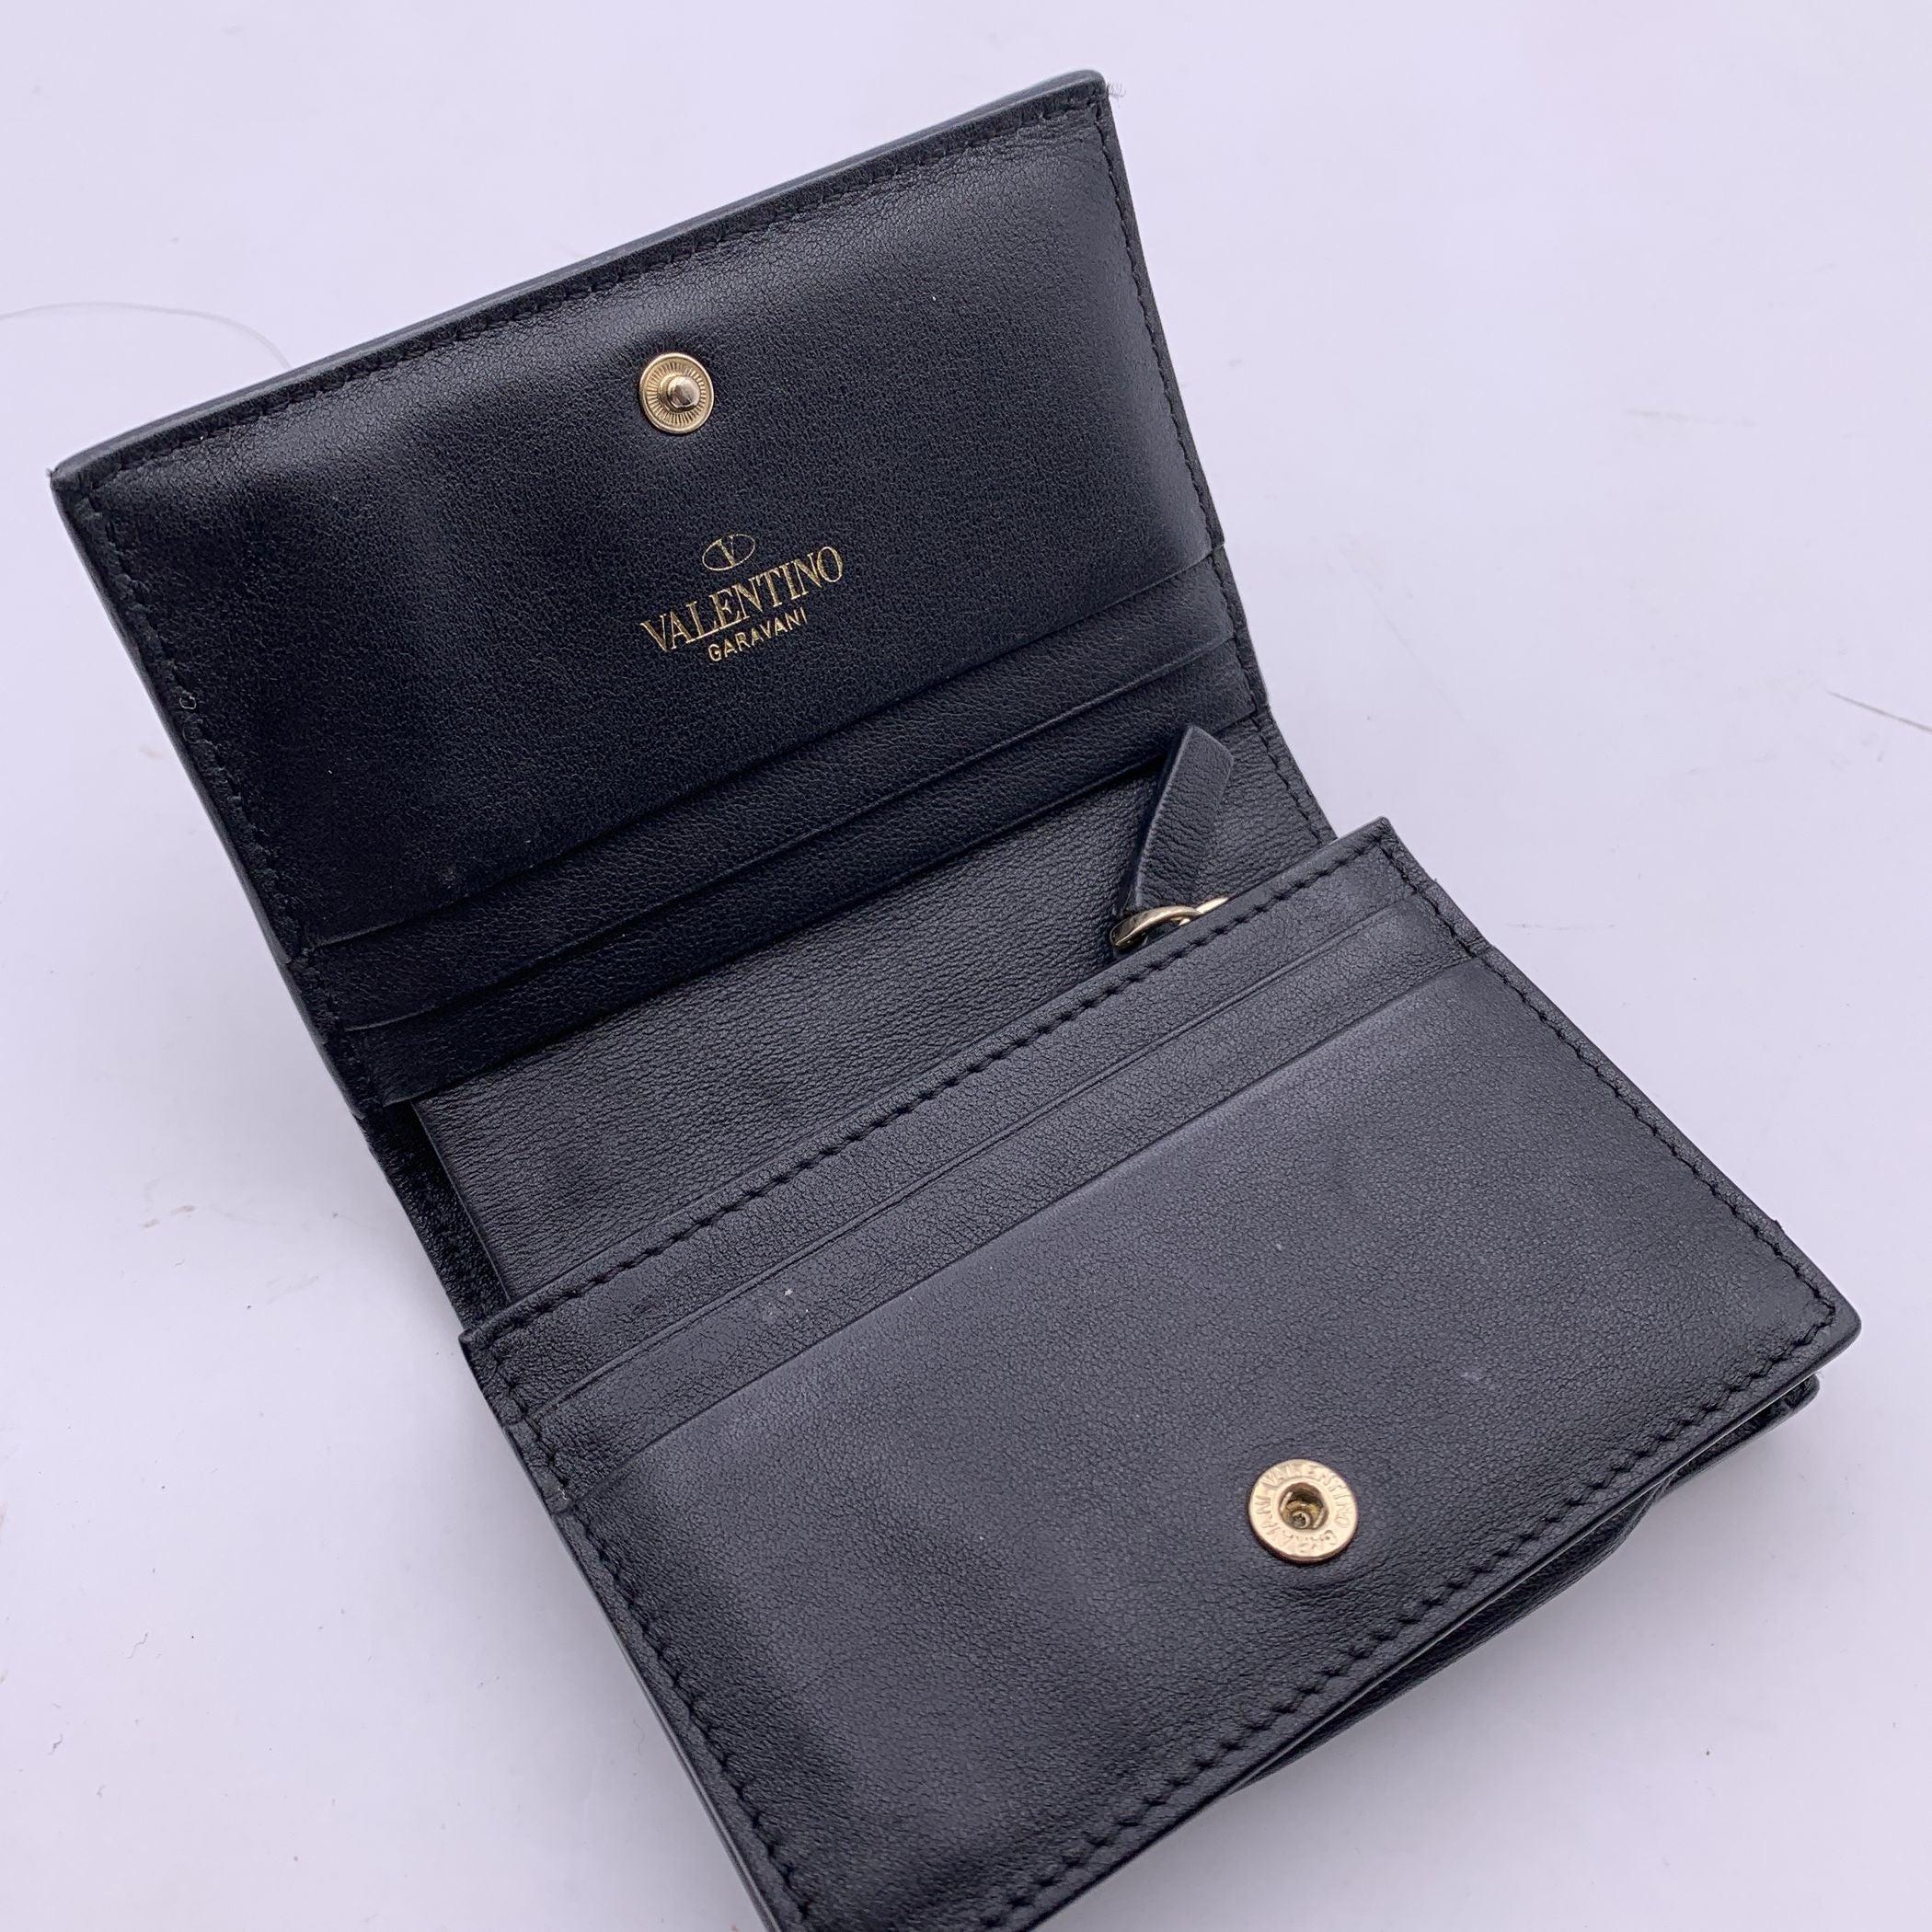 Valentino Black Leather Rockstud Compact French Flap Wallet 1